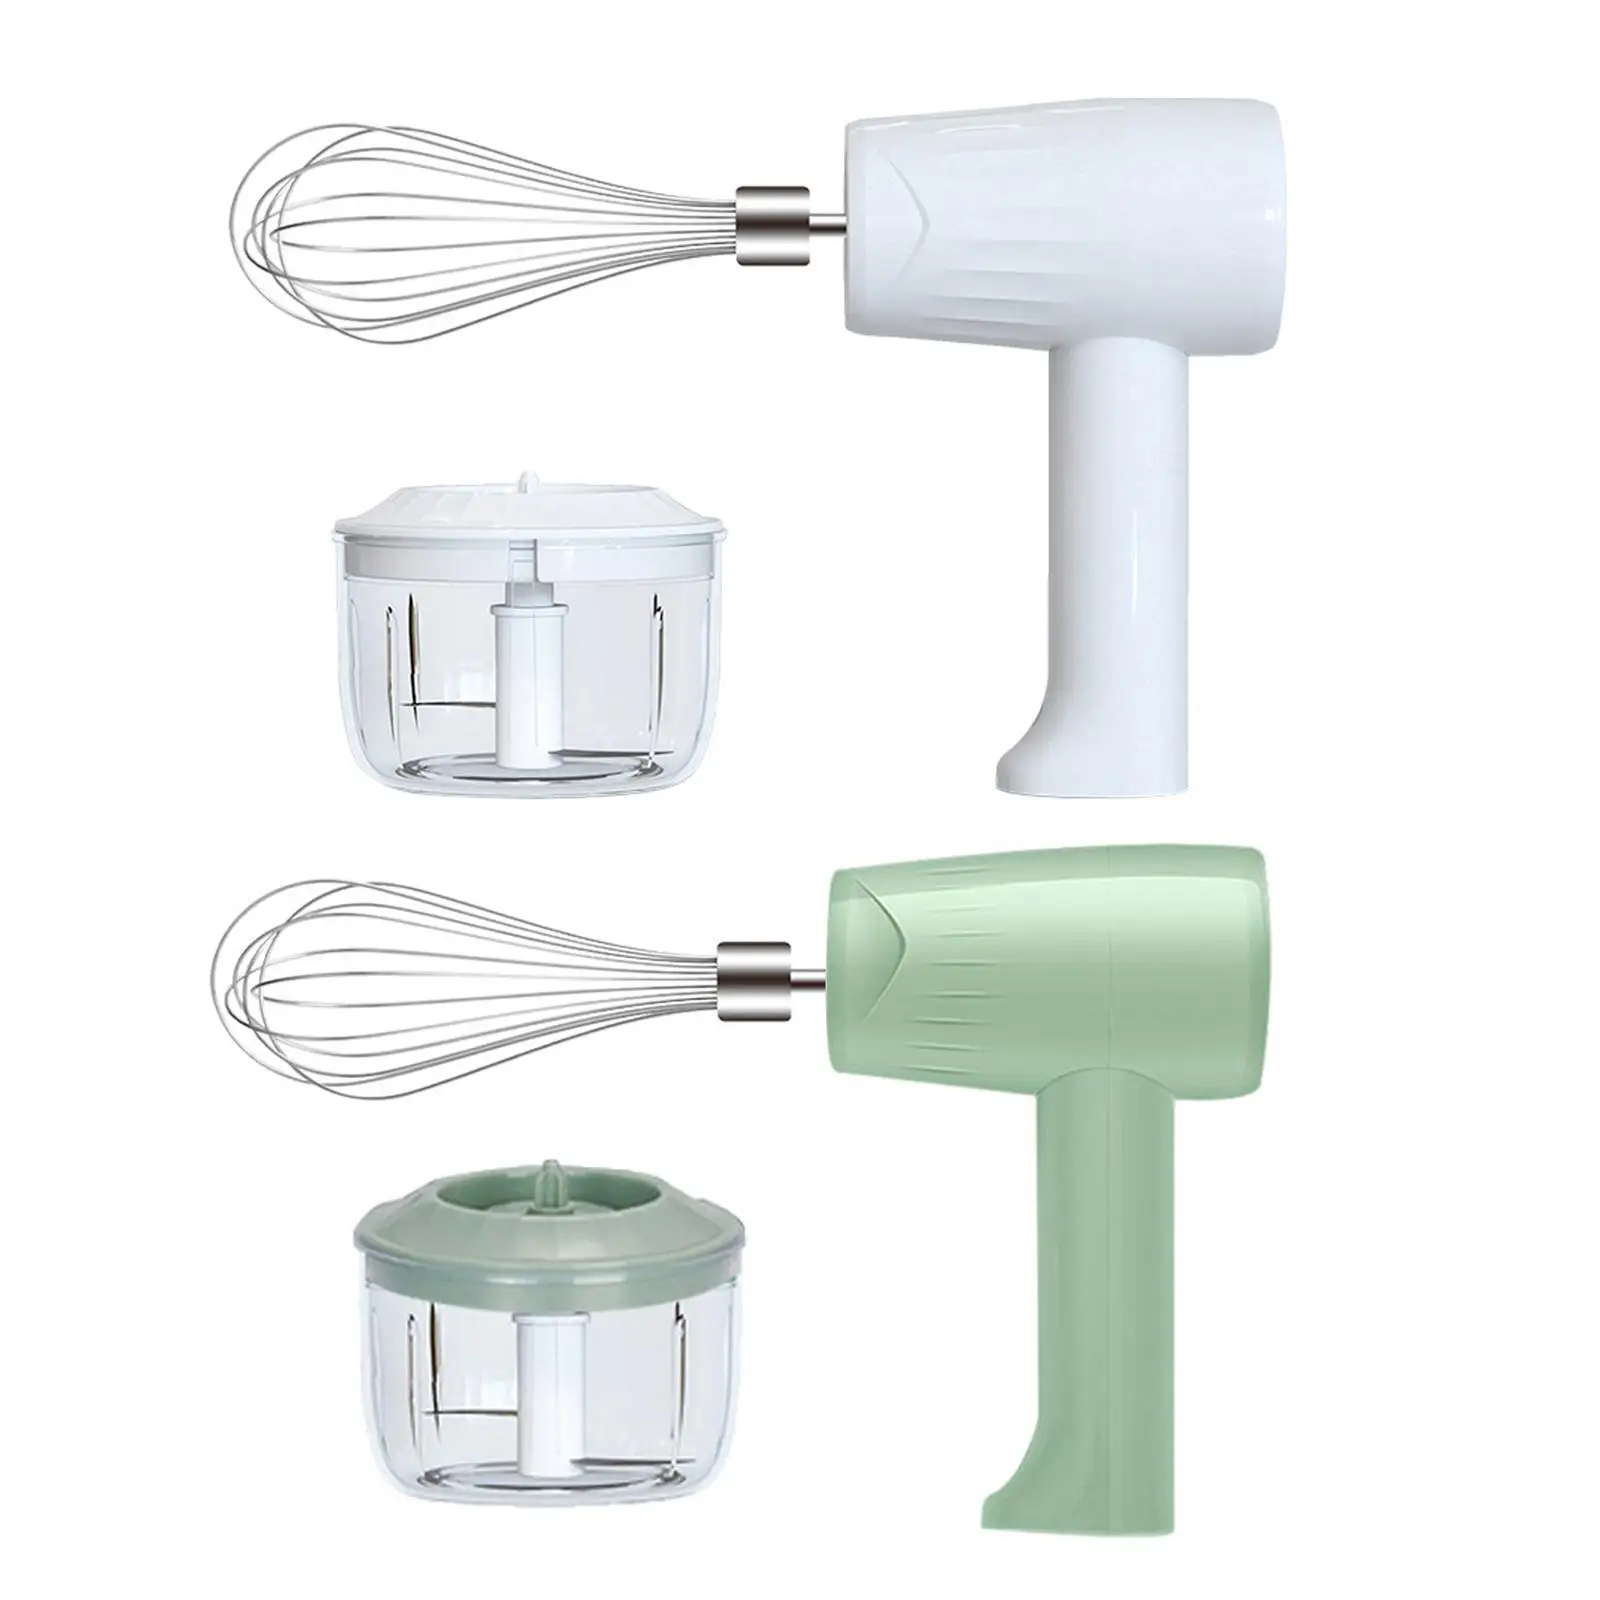 Eggbeater Portable Detachable USB Charging Stainless Steel Garlic Chopper for Cooking Baking